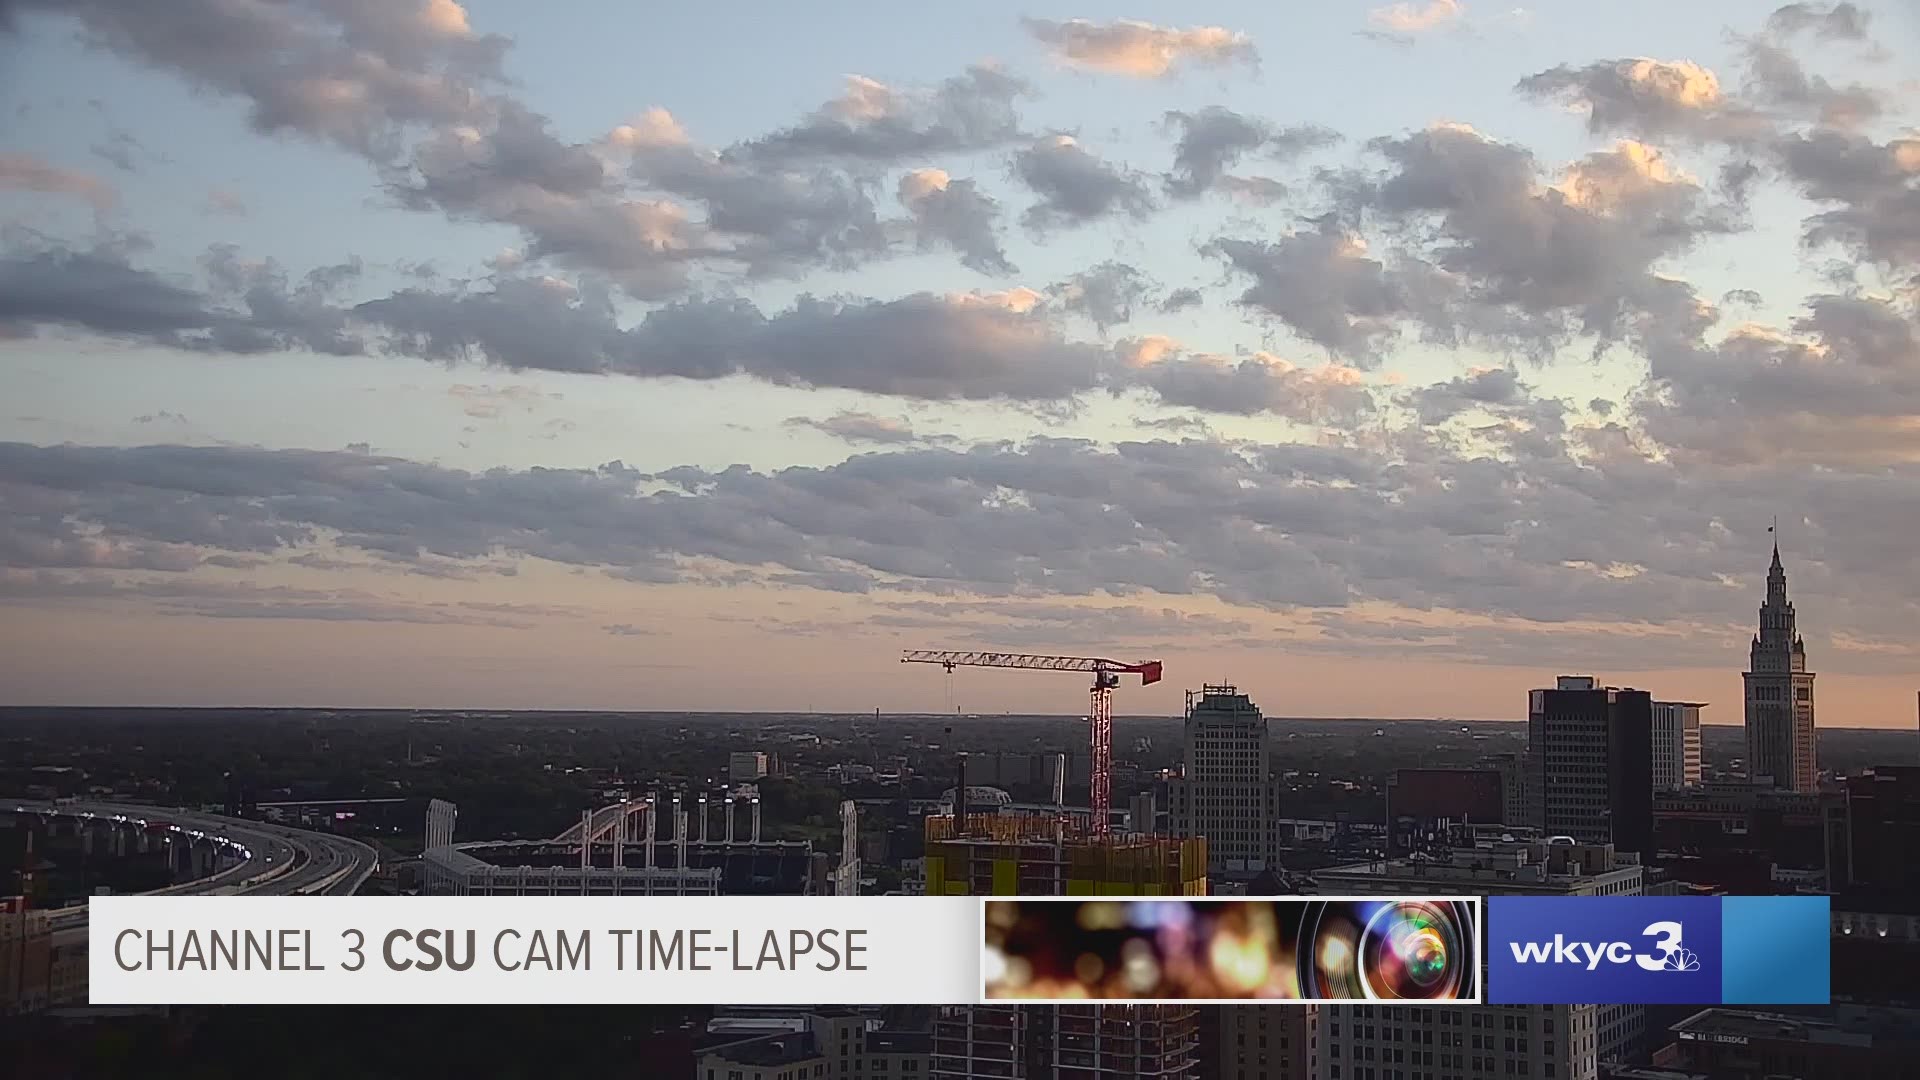 Just watching the clouds pass by this evening on the Channel 3 CSU Cam weather time-lapse for August 9, 2019. Is it really the weekend already???? #3weather